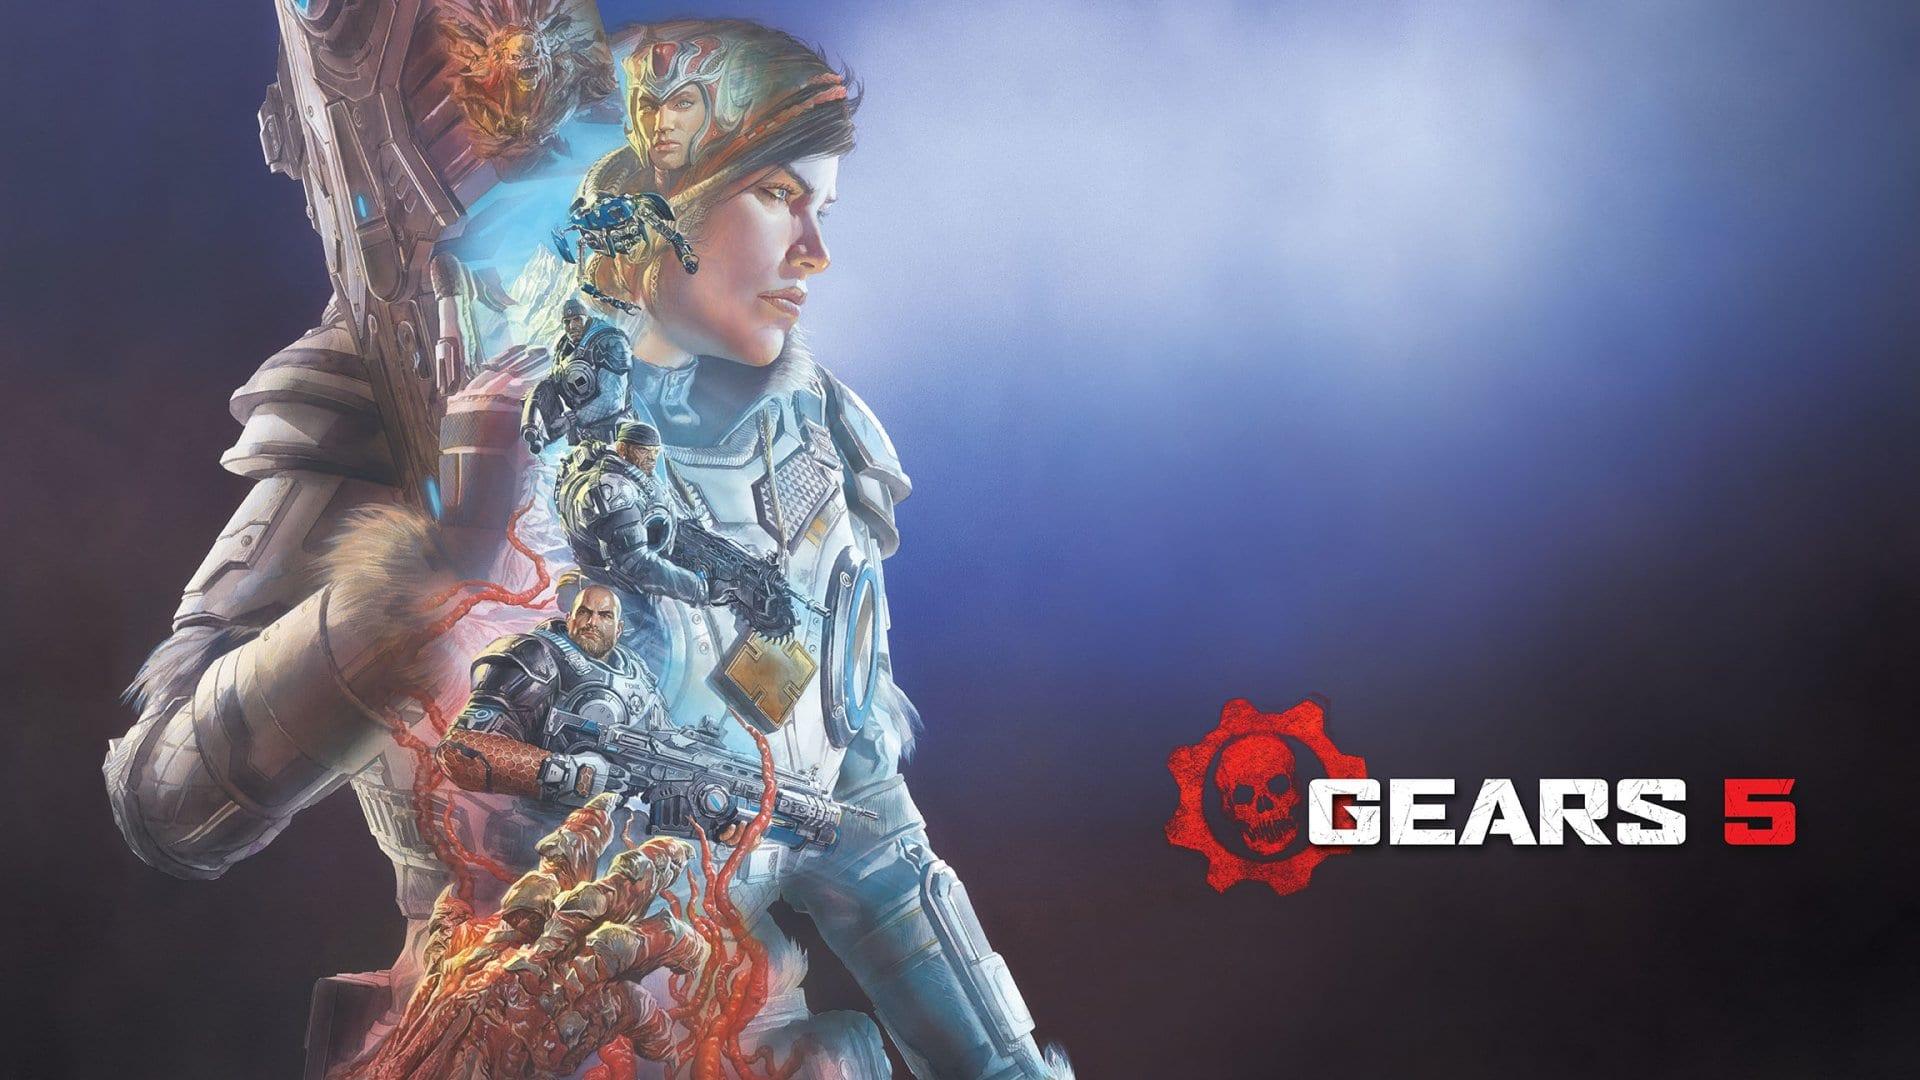 4K & HD Gears 5 Wallpaper You Need to Make Your Next Desktop Background